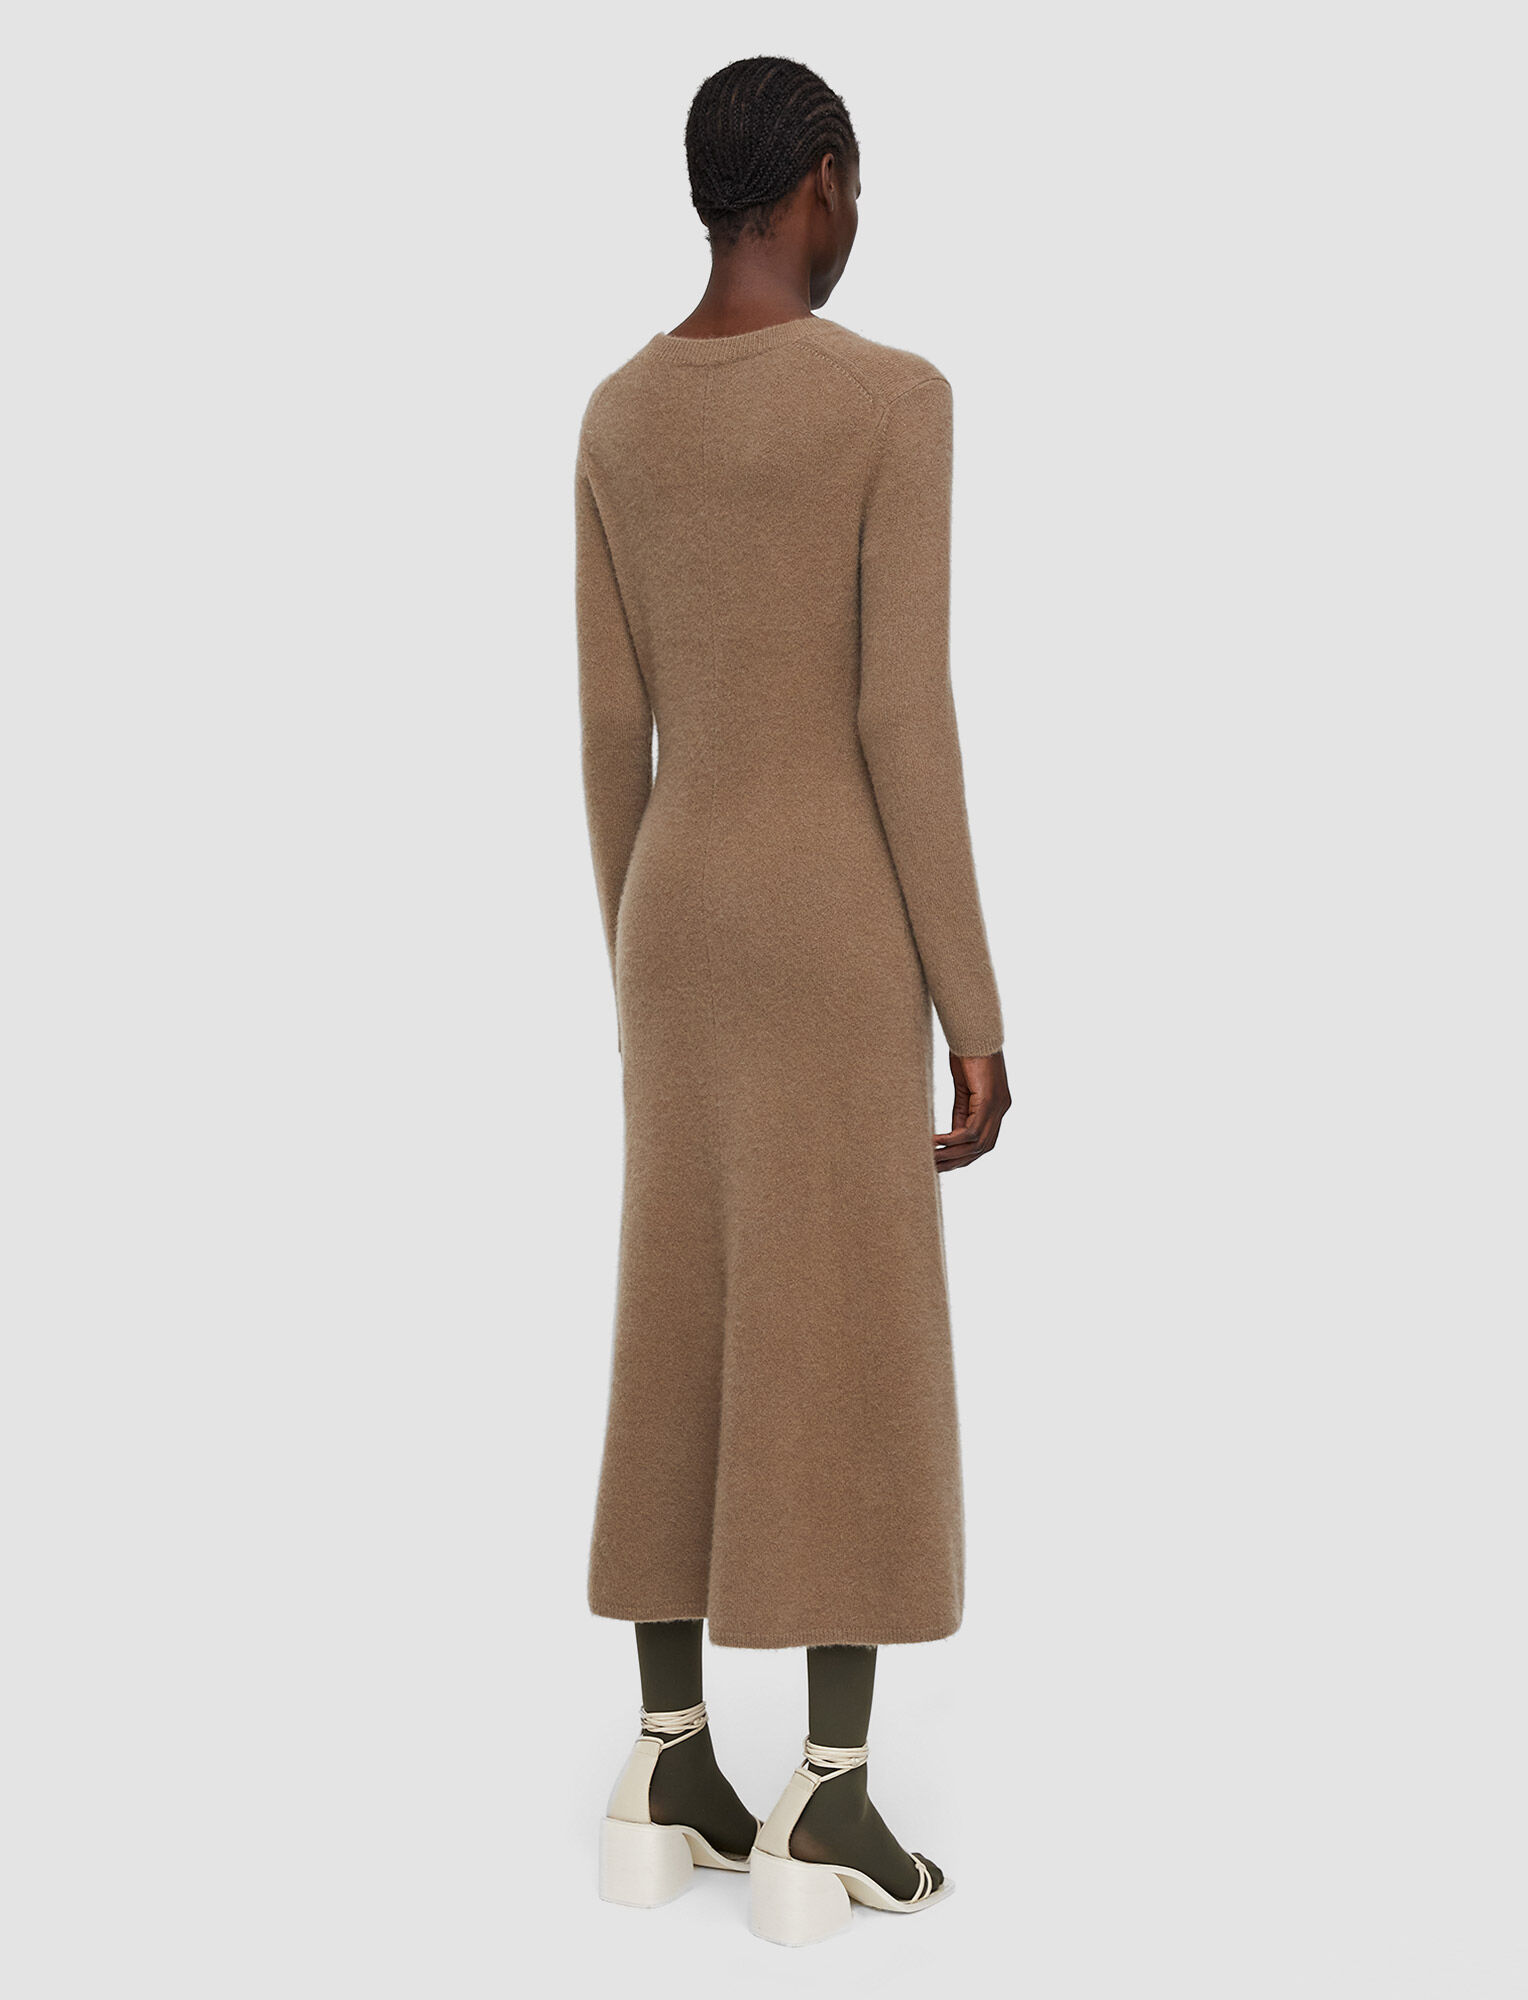 Joseph, Brushed Cashmere Dress, in Hickory